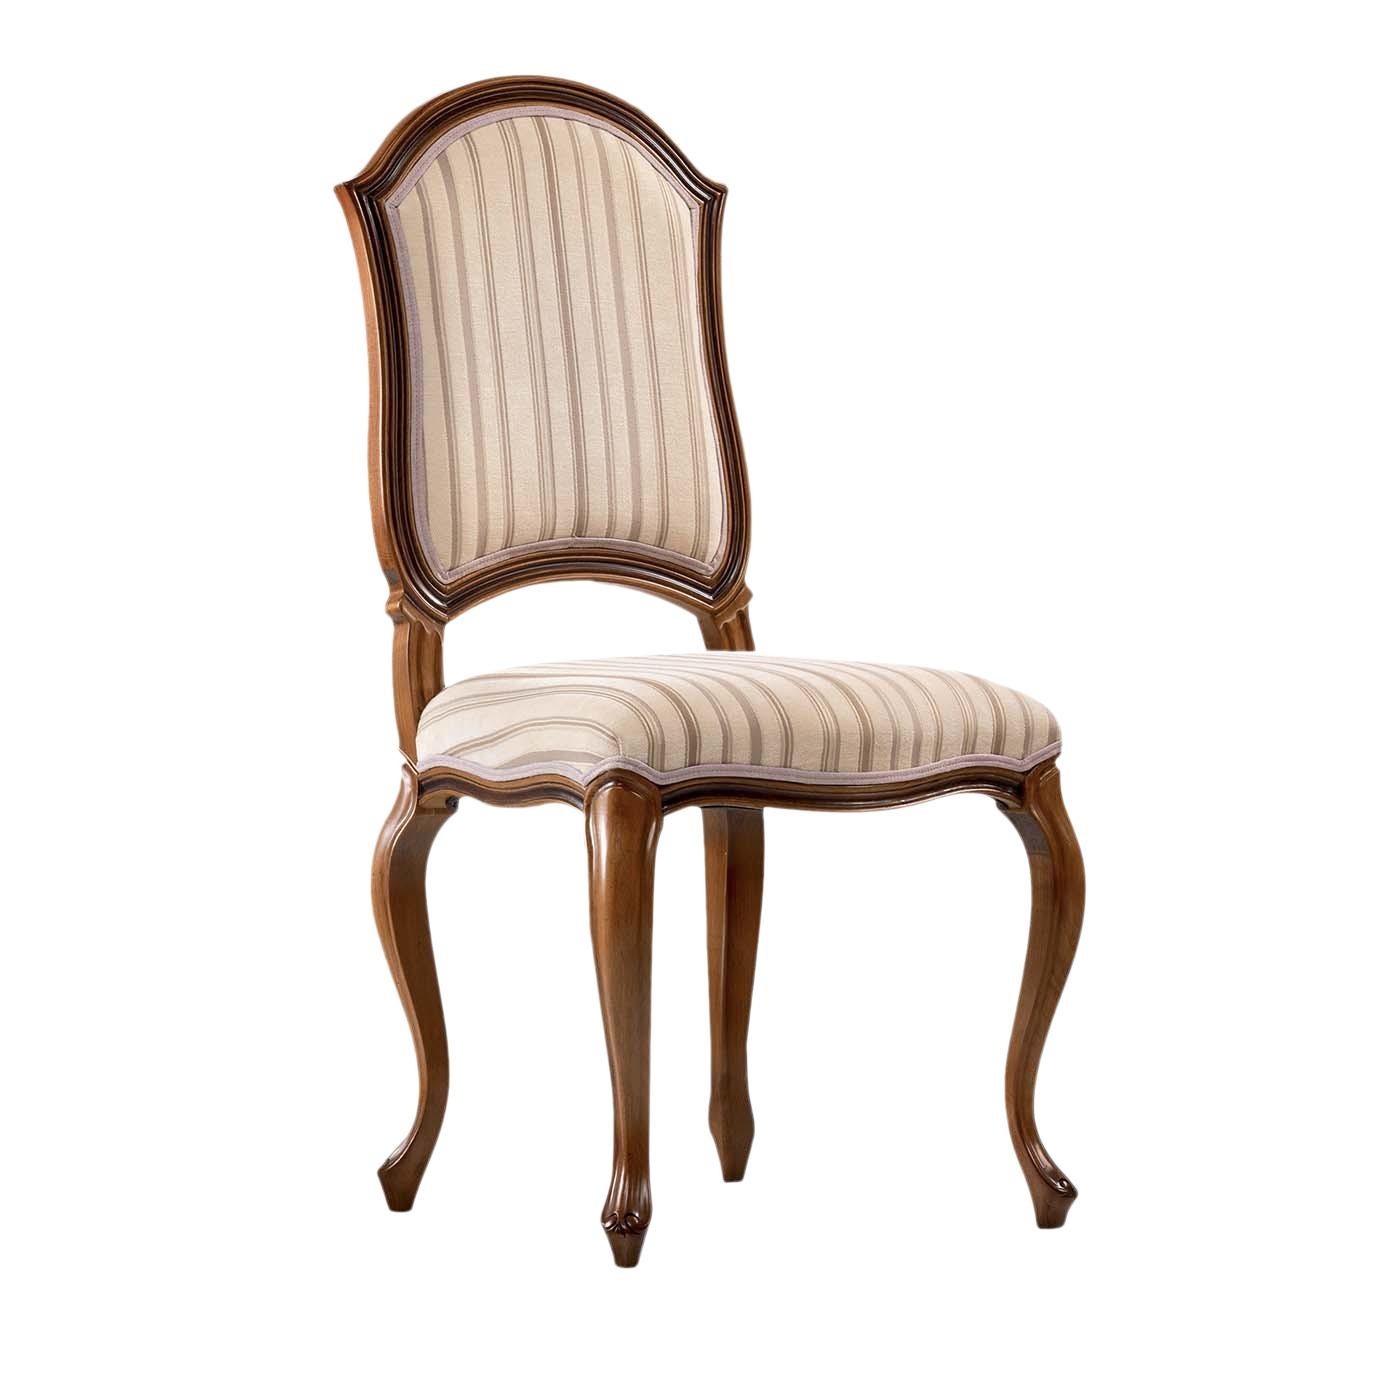 Contemporary Wooden Dining Chair with Striped Fabric